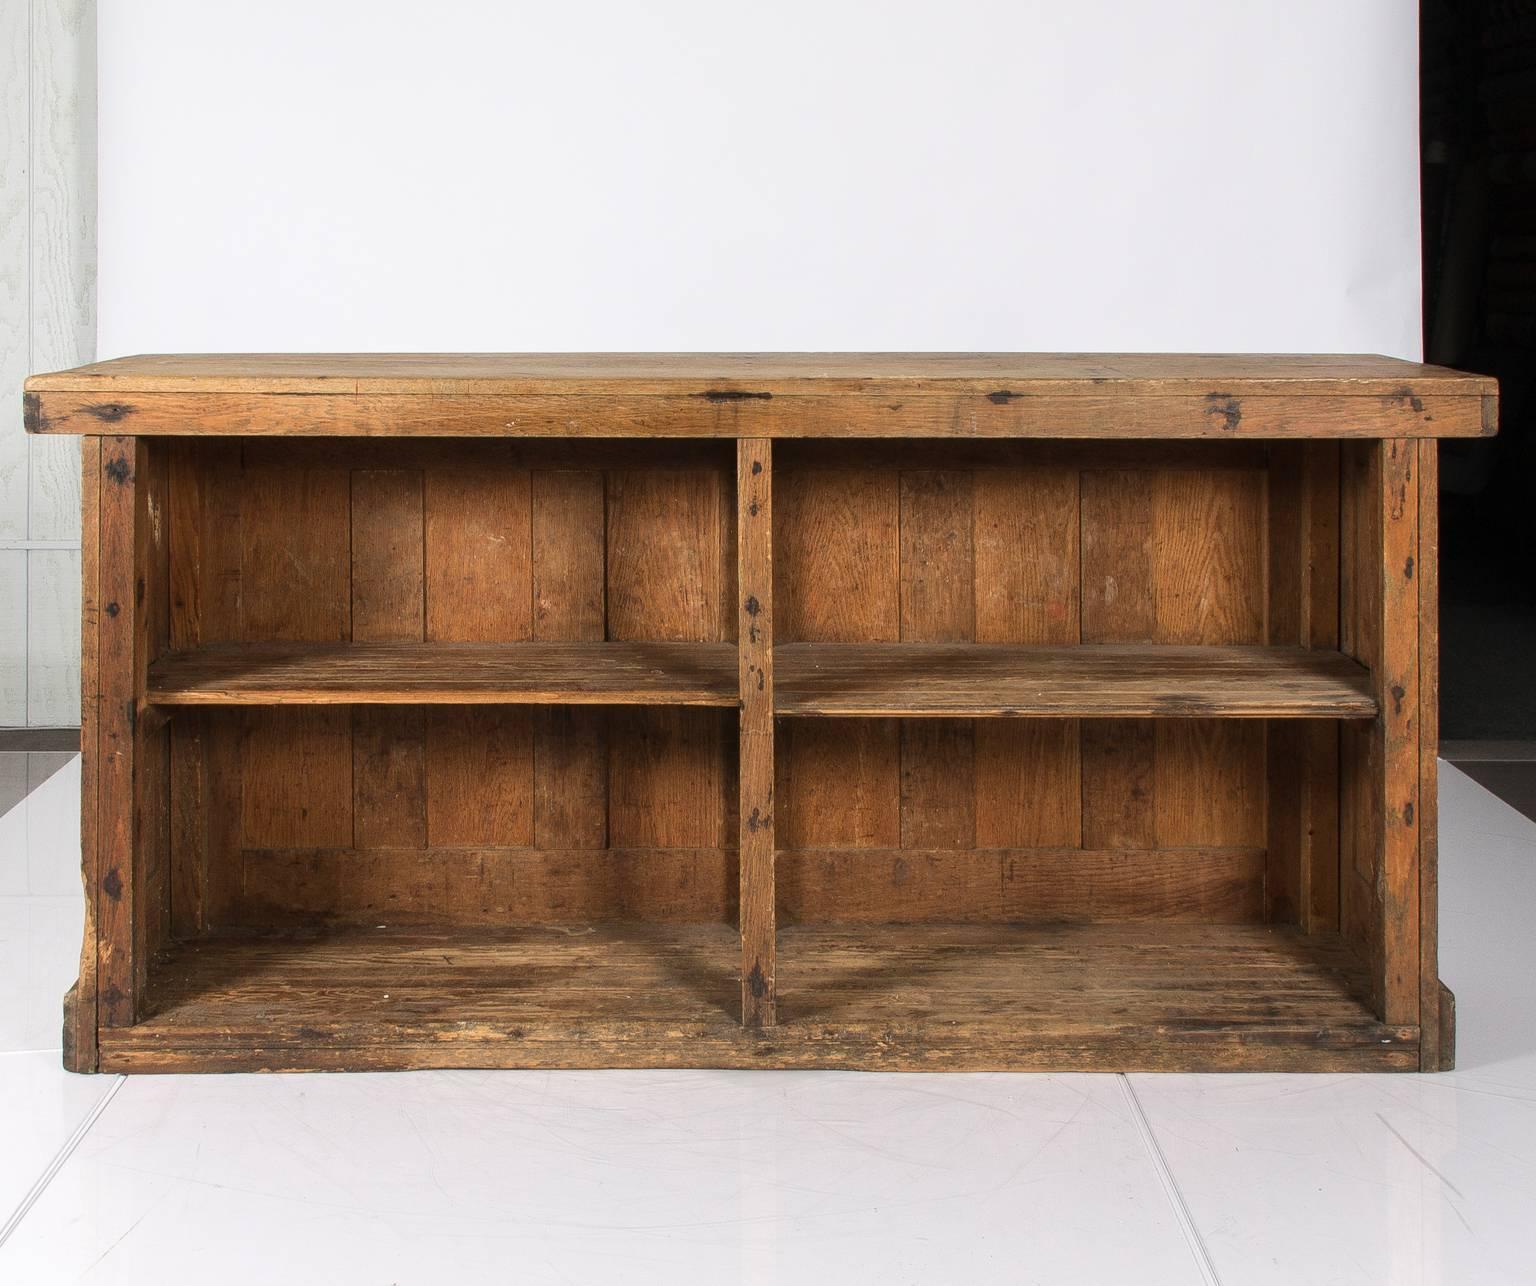 1880s chestnut store counter with bread board interior shelves.
 